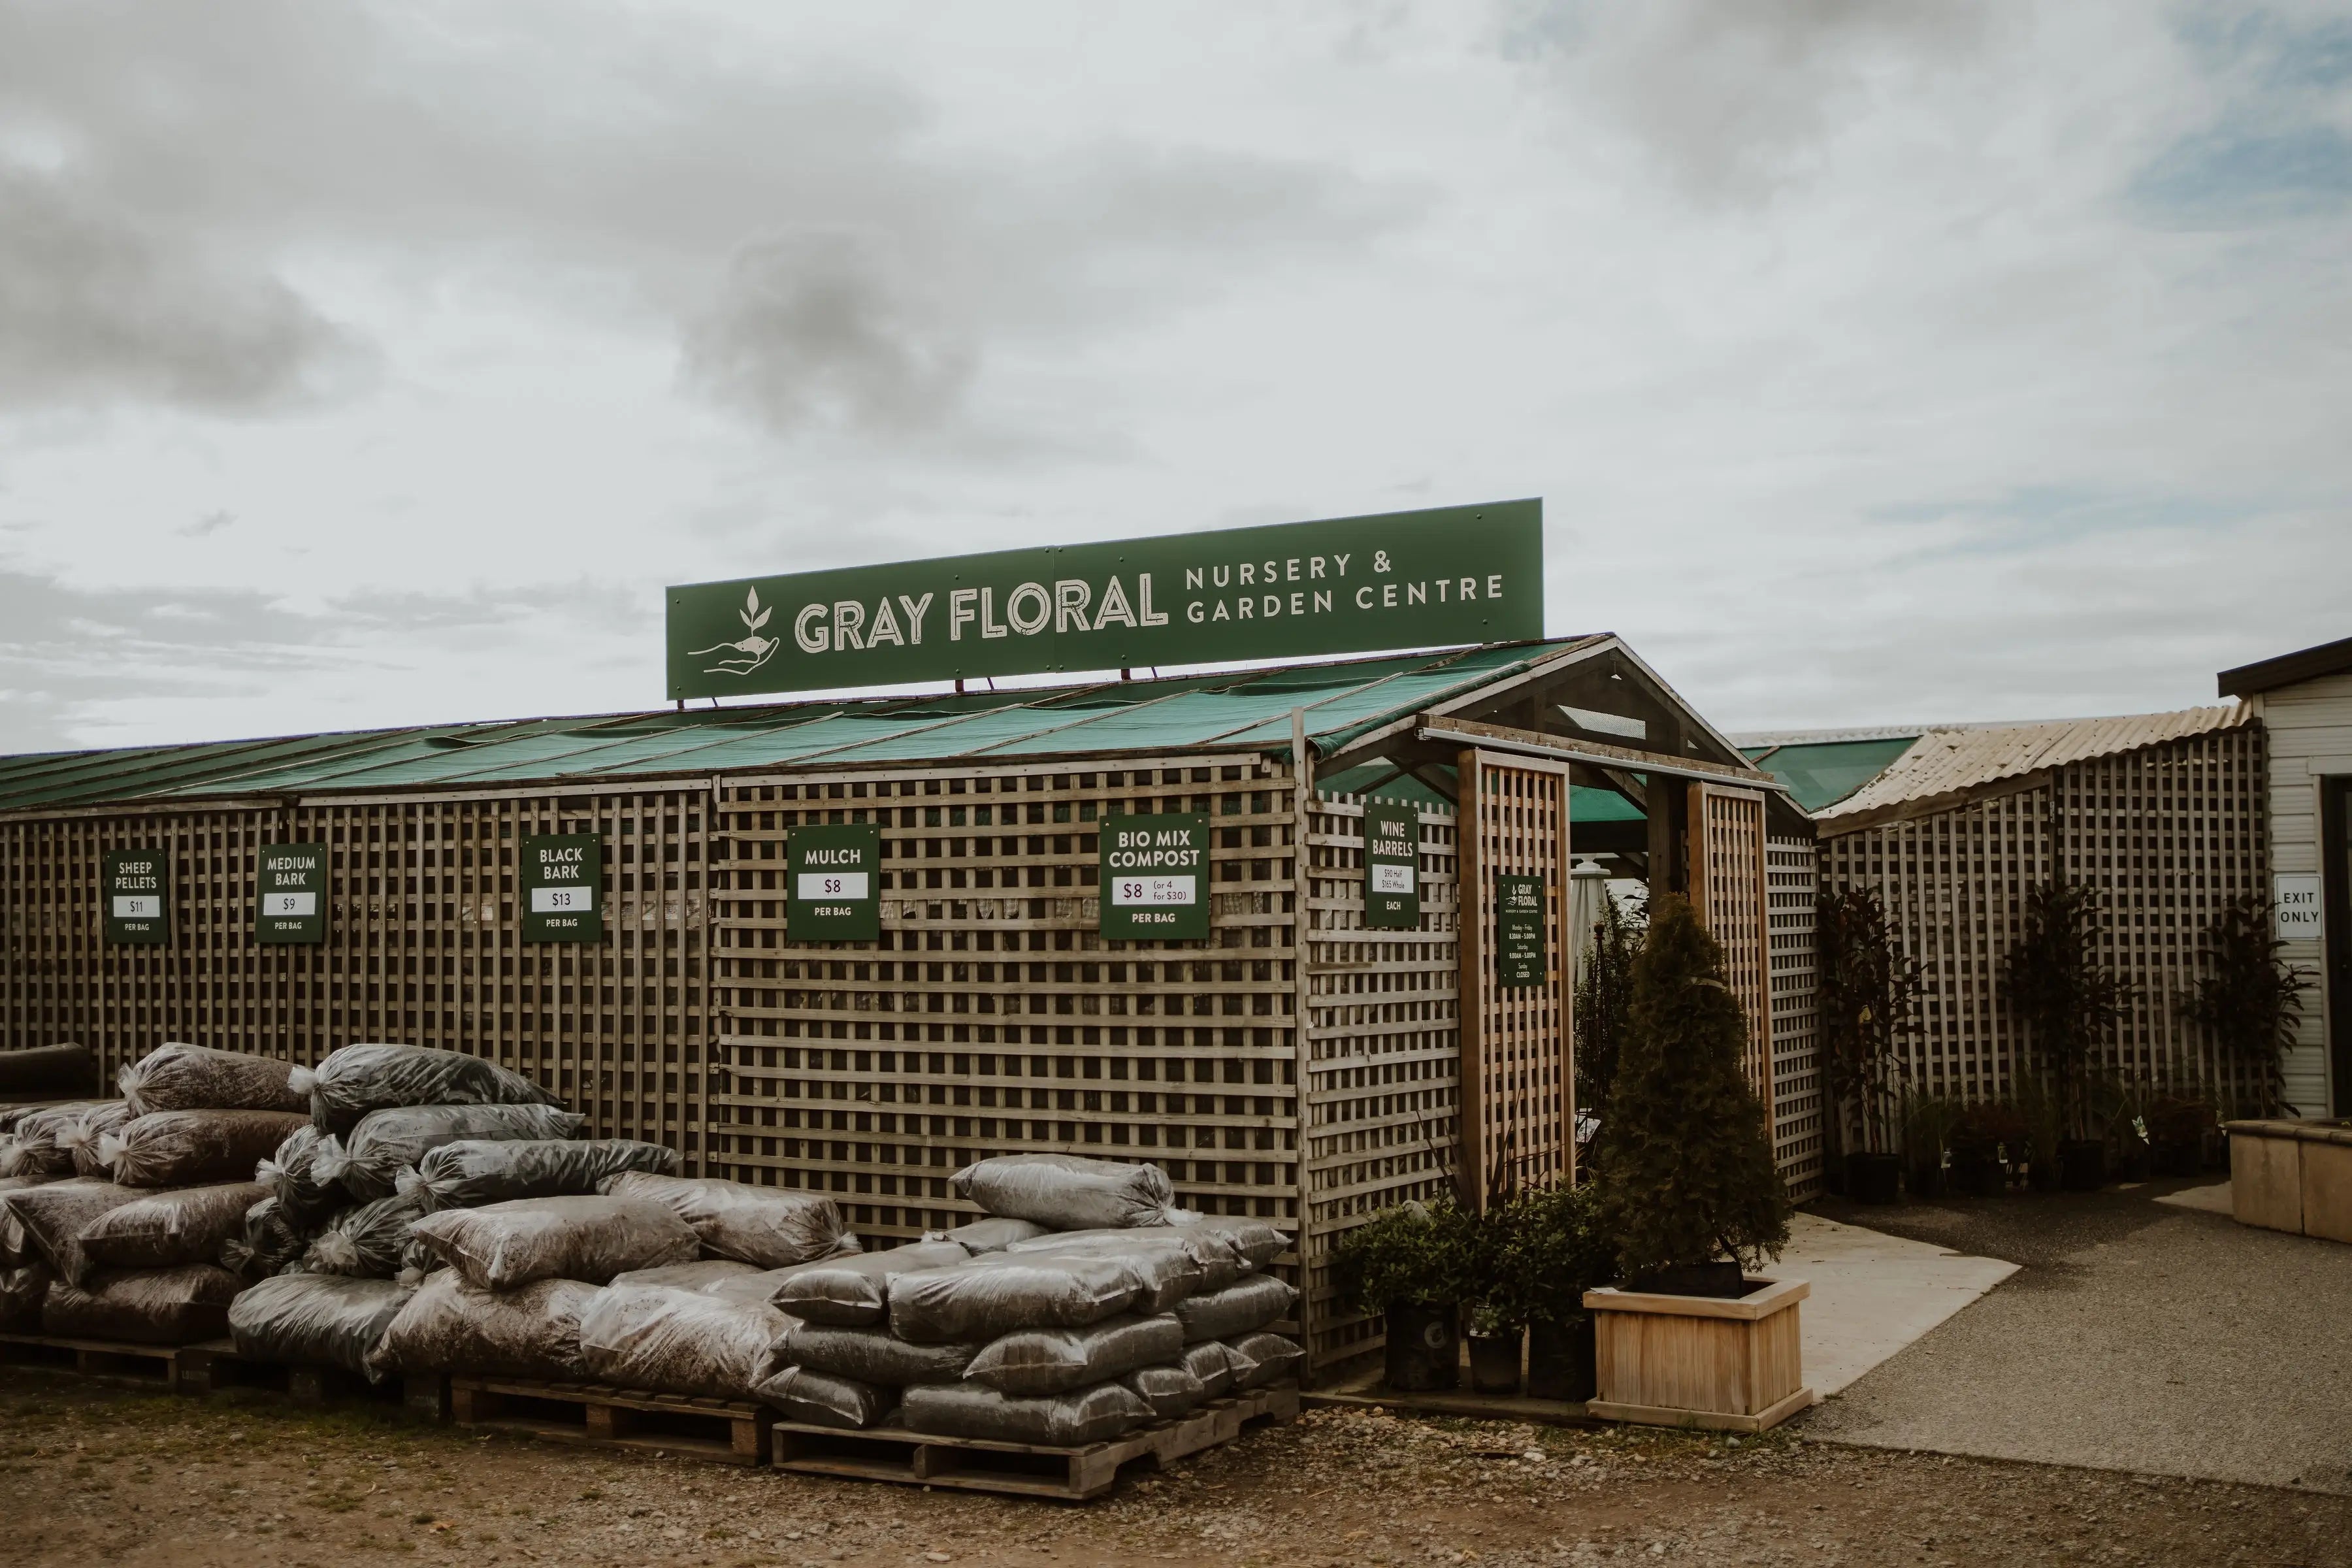 Gray Floral Nursery and Garden Centre in Blenheim, Marlborough, New Zealand for all your Bulk Landscaping Supplies